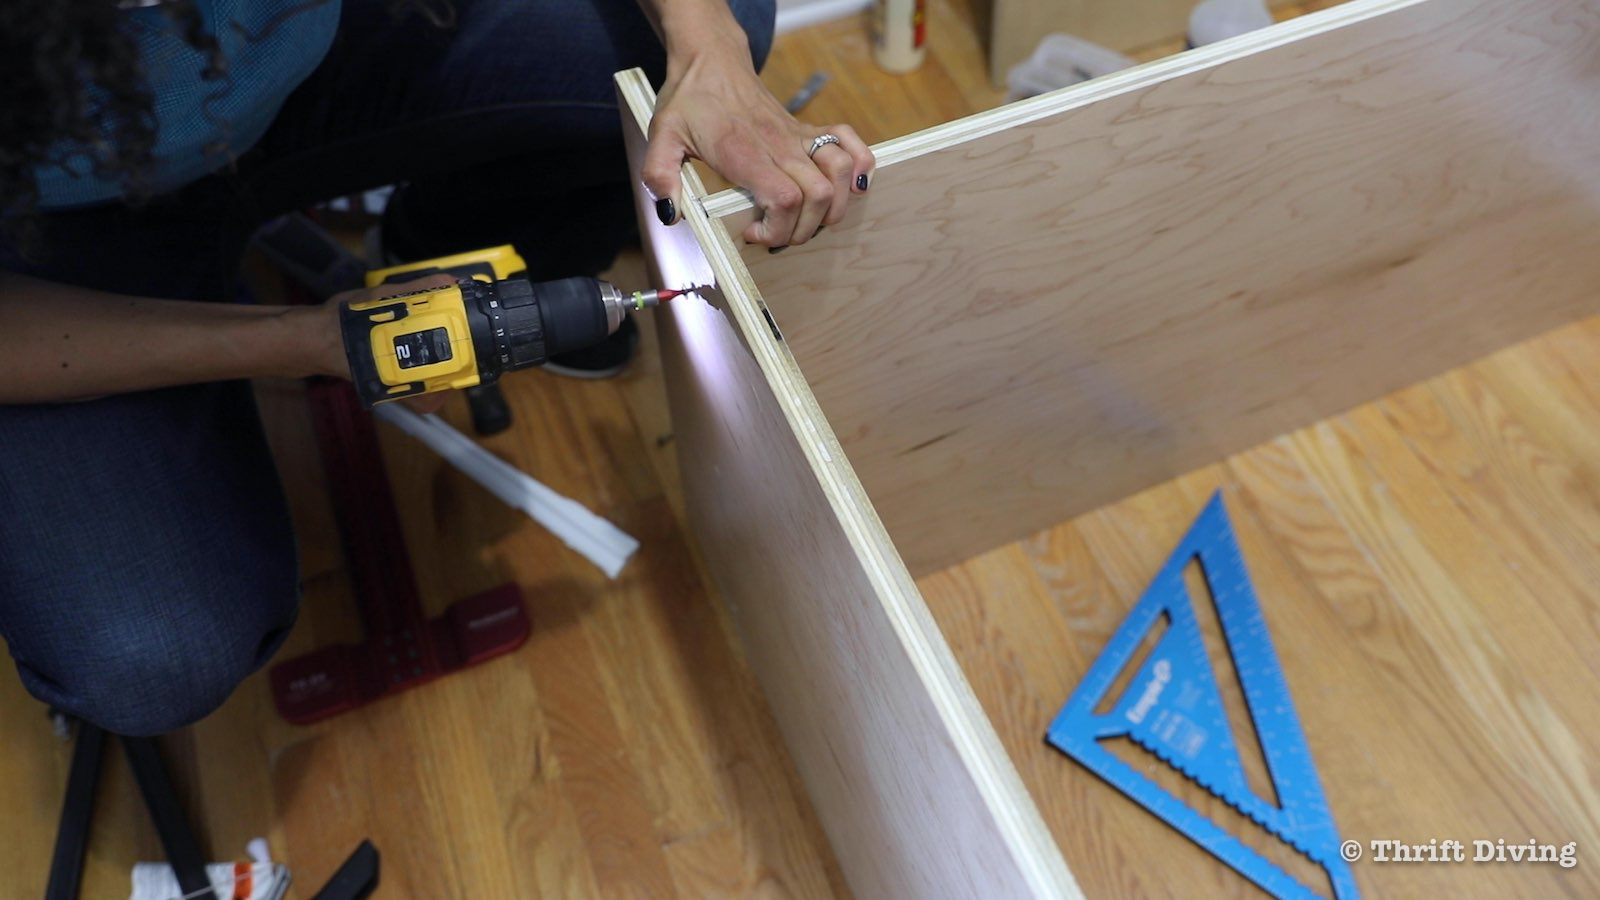 How to Build a Walk-in Closet Organizer From Scratch - Attach bottom shelf to dado with wood glue and secure with screws. - Thrift Diving